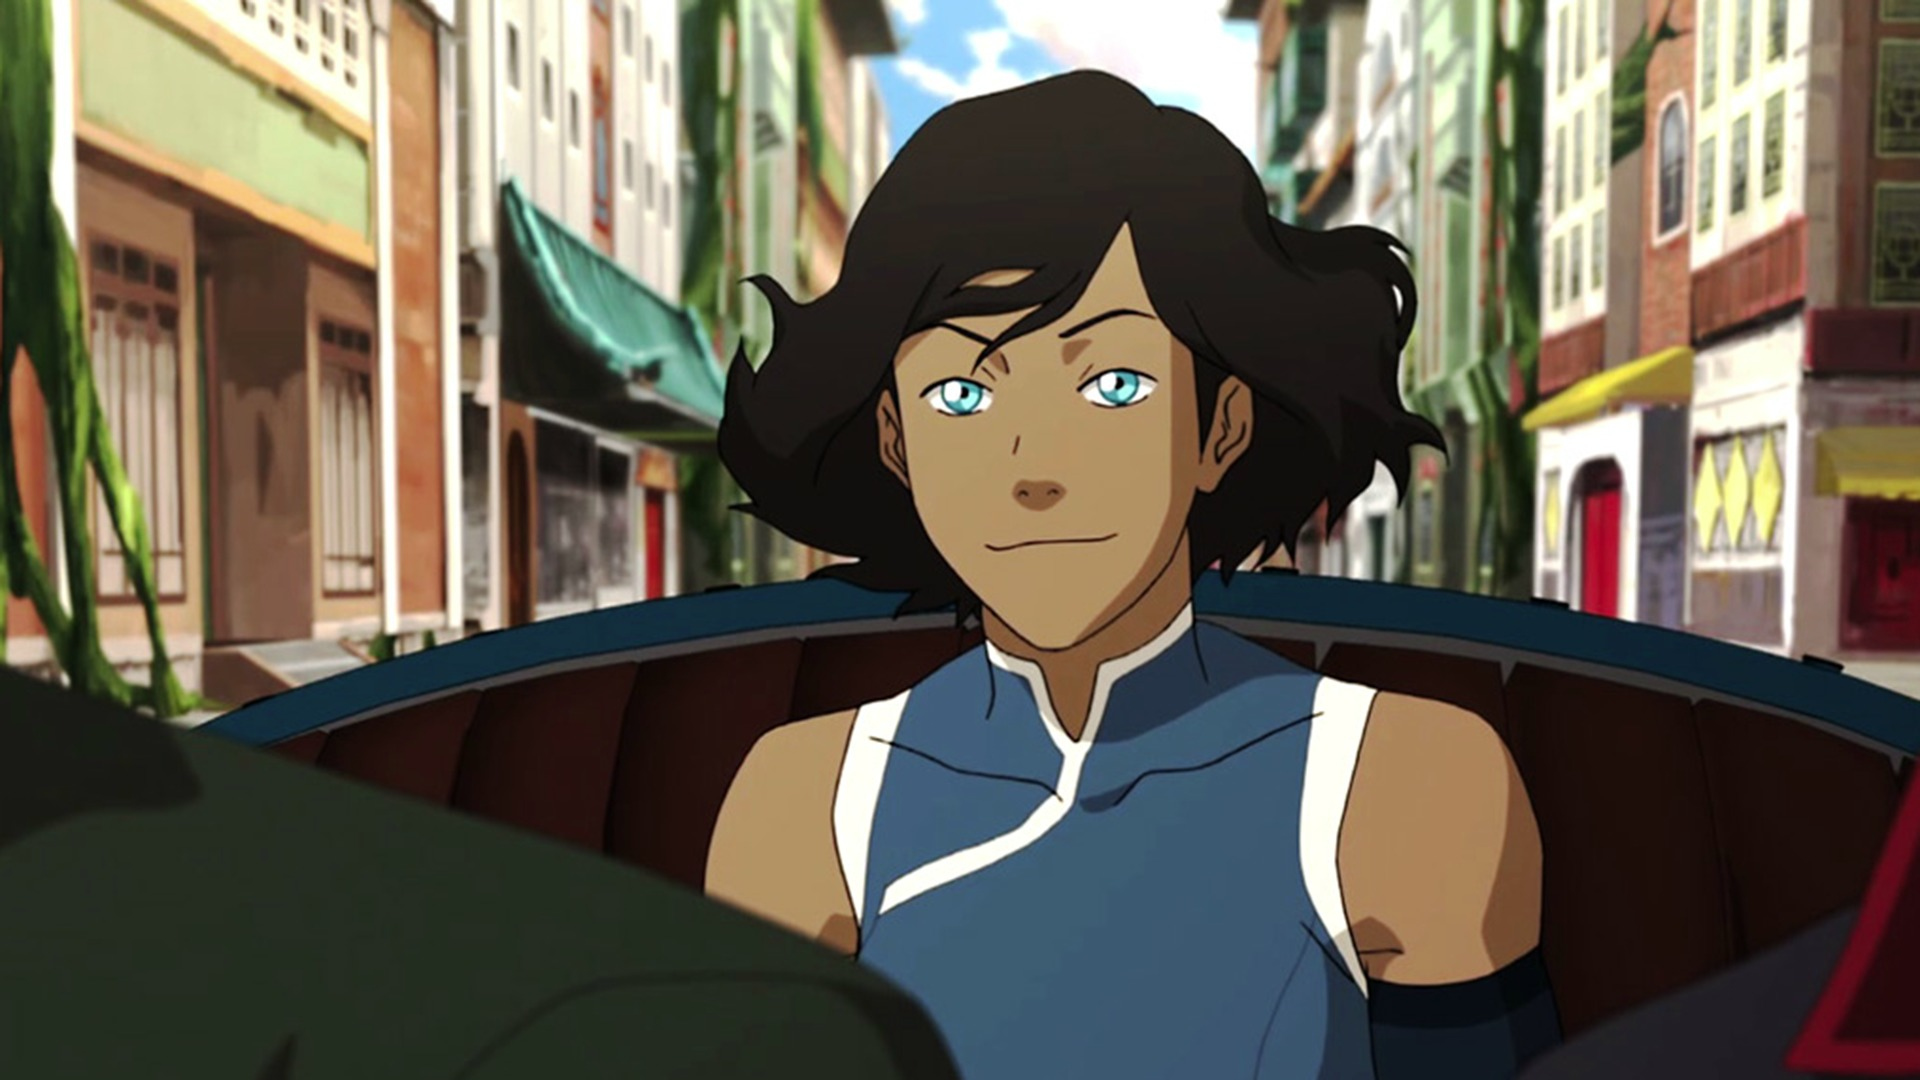 Avatar The Last Airbender Sequel Series The Legend of Korra Finally Hits  Netflix in August  TV Guide